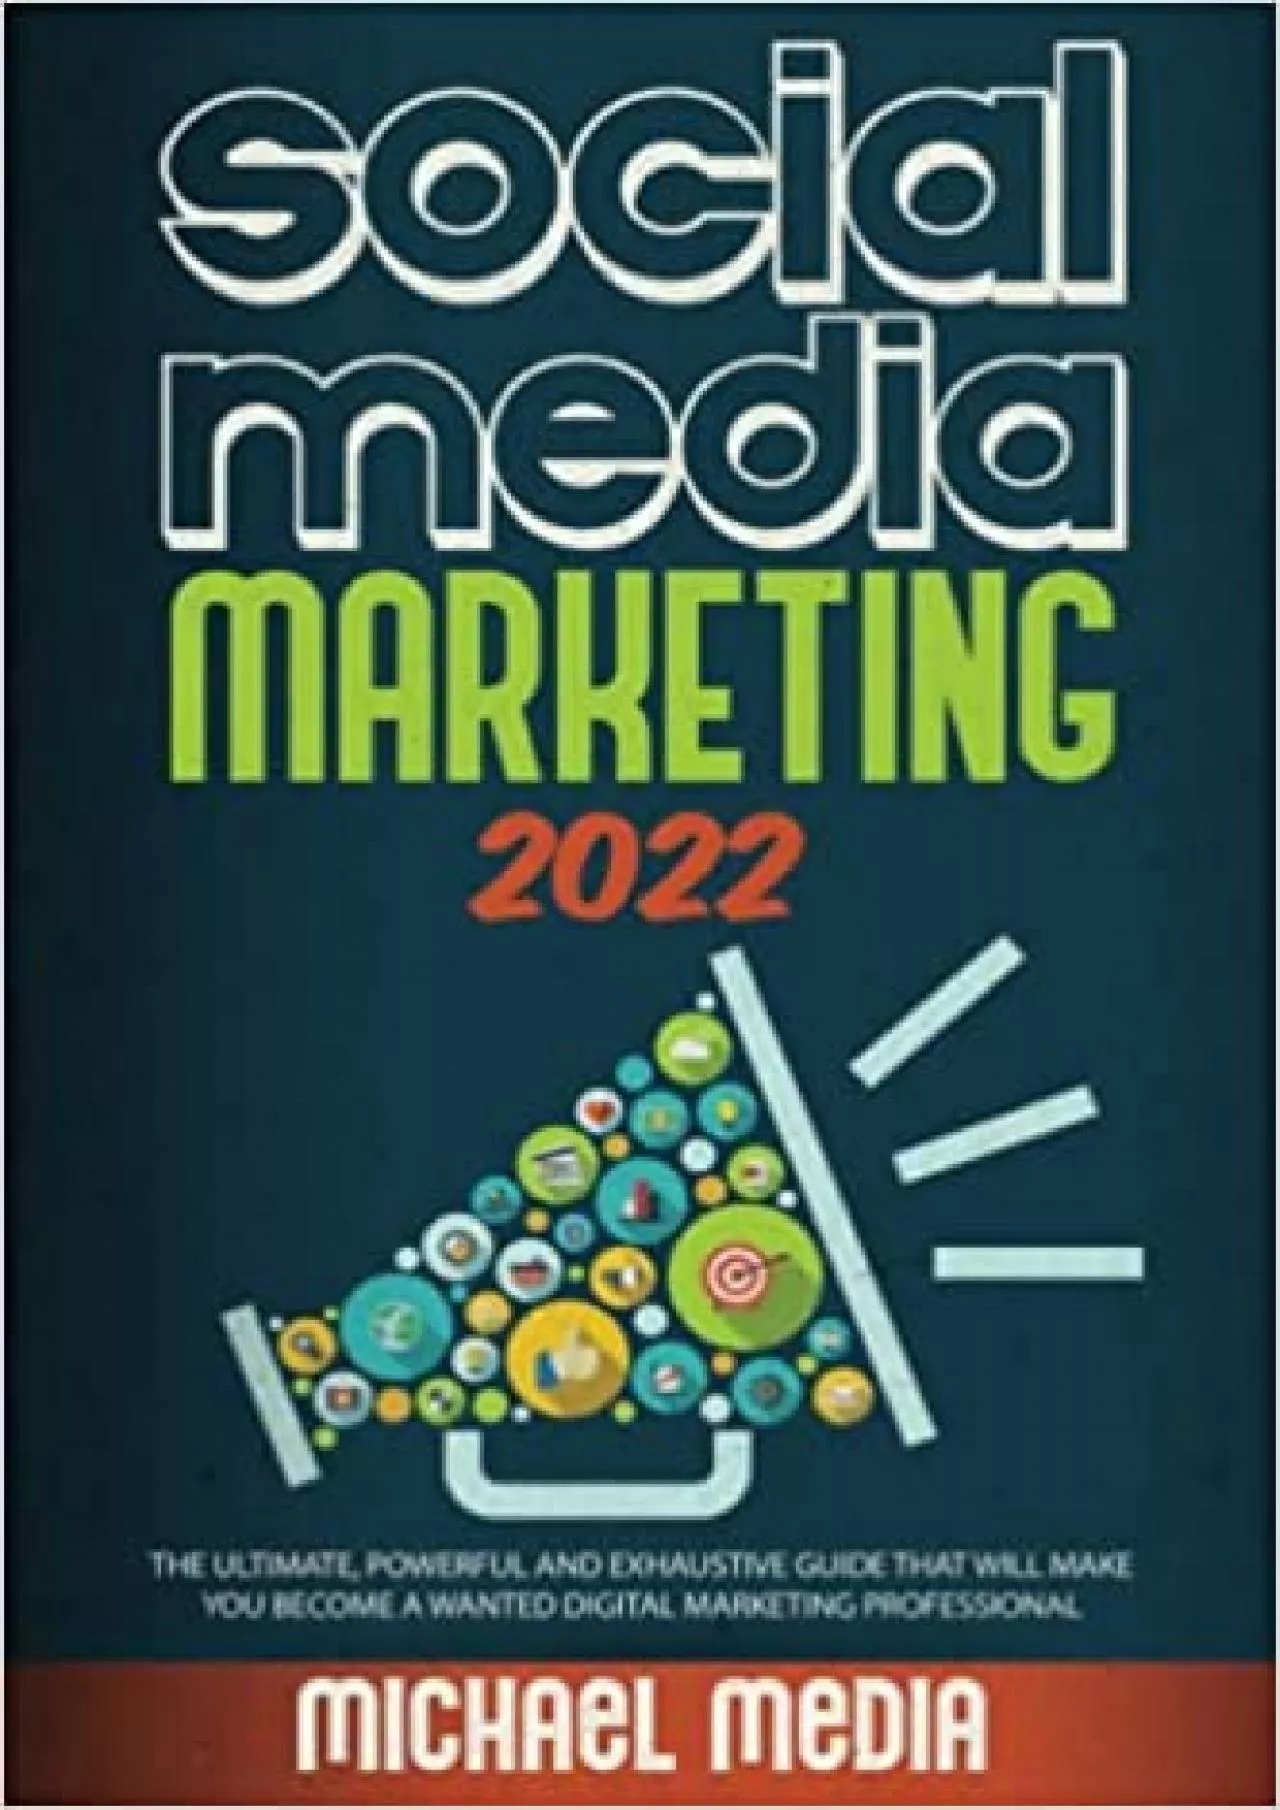 SOCIAL MEDIA MARKETING 2022 THE ULTIMATE, POWERFUL AND EXHAUSTIVE GUIDE THAT WILL MAKE